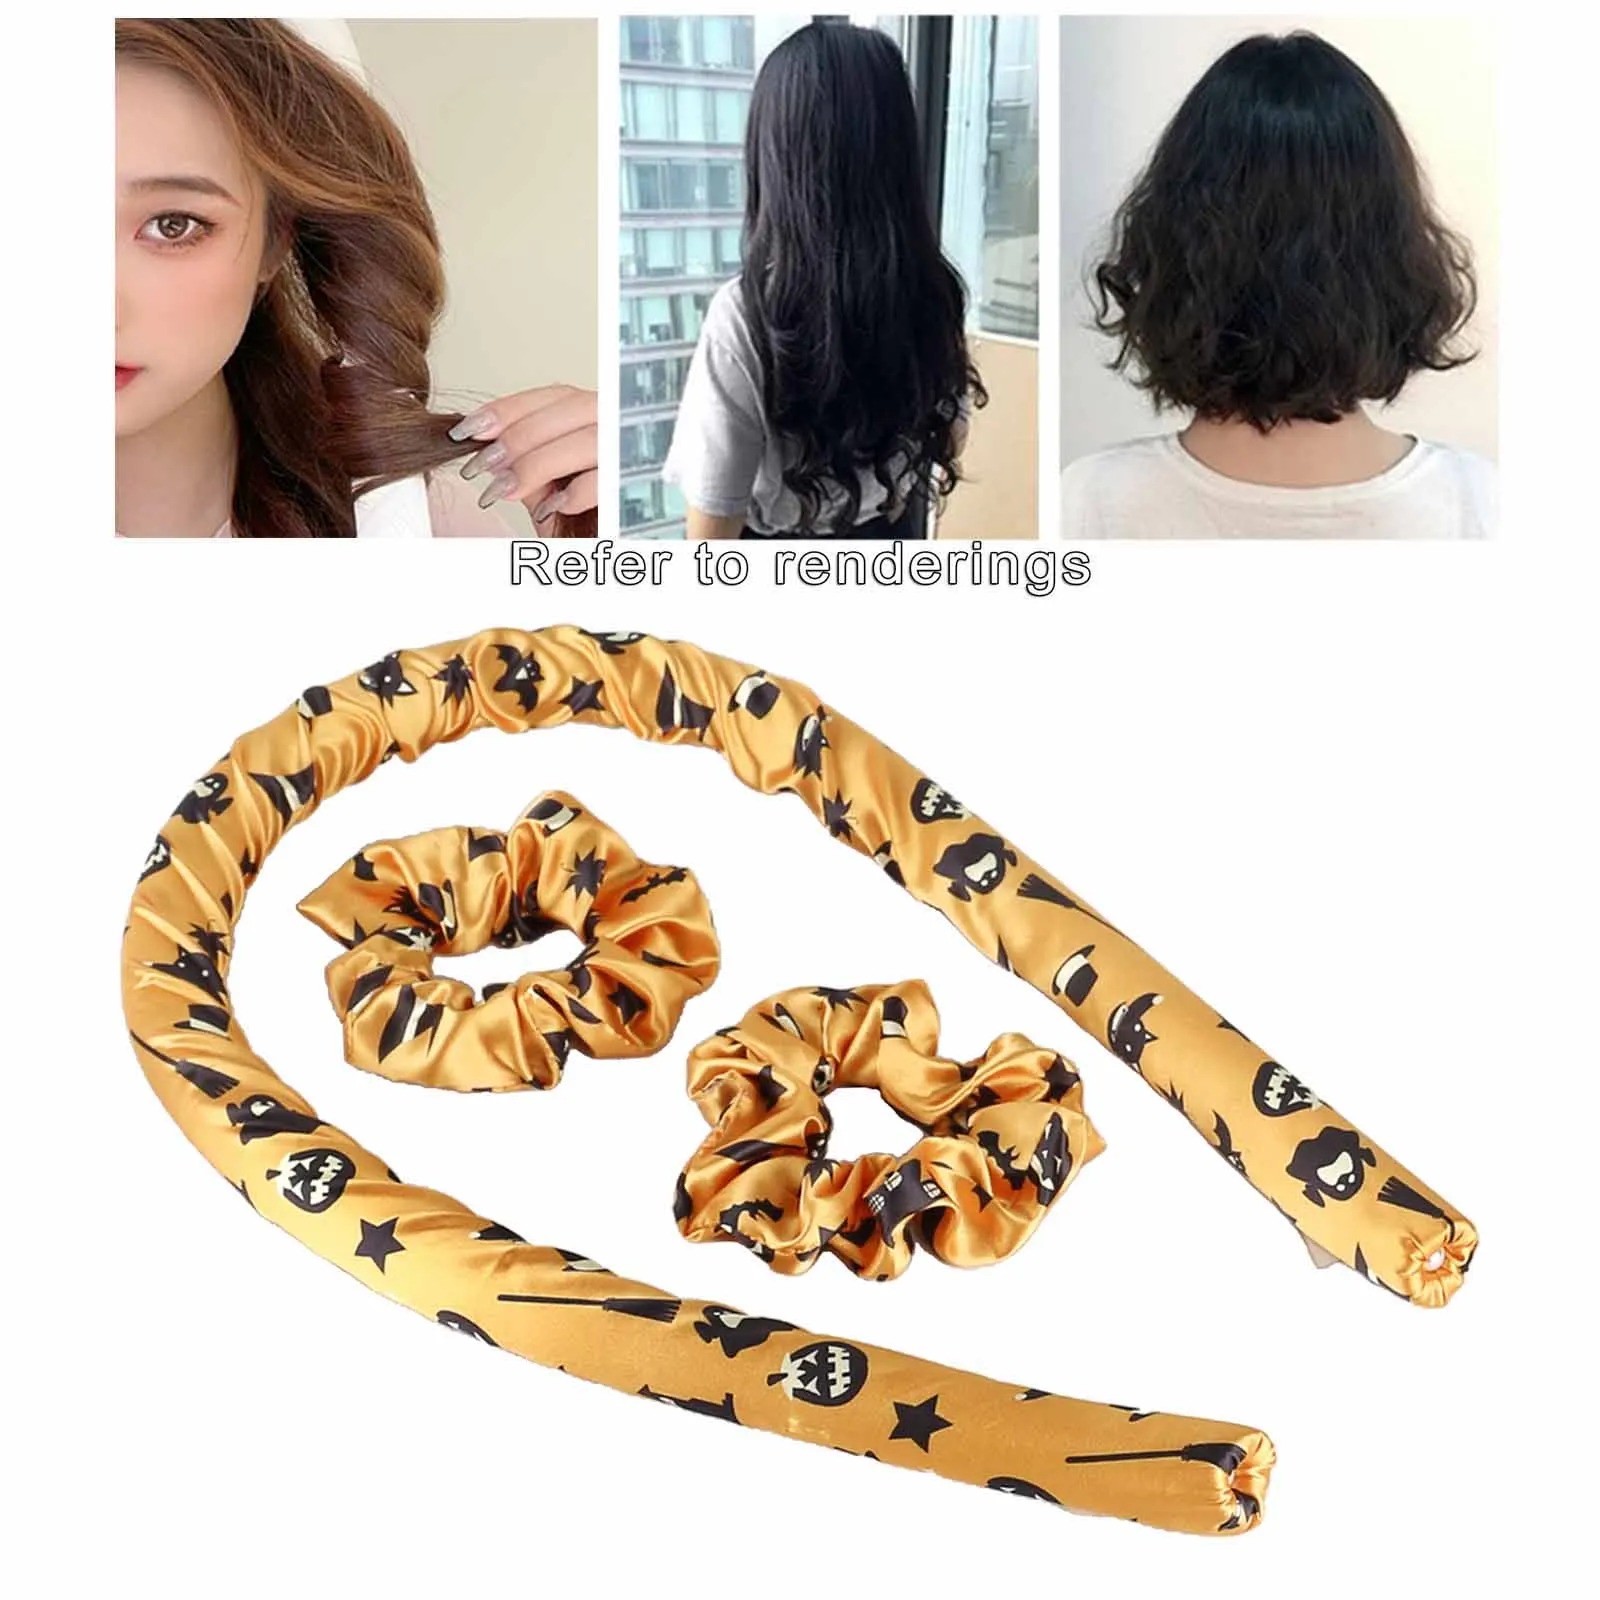 Curling Rod DIY Hair Styling Tools with Clip Sleeping Soft Foam Heatless Hair Rollers for Women Girls